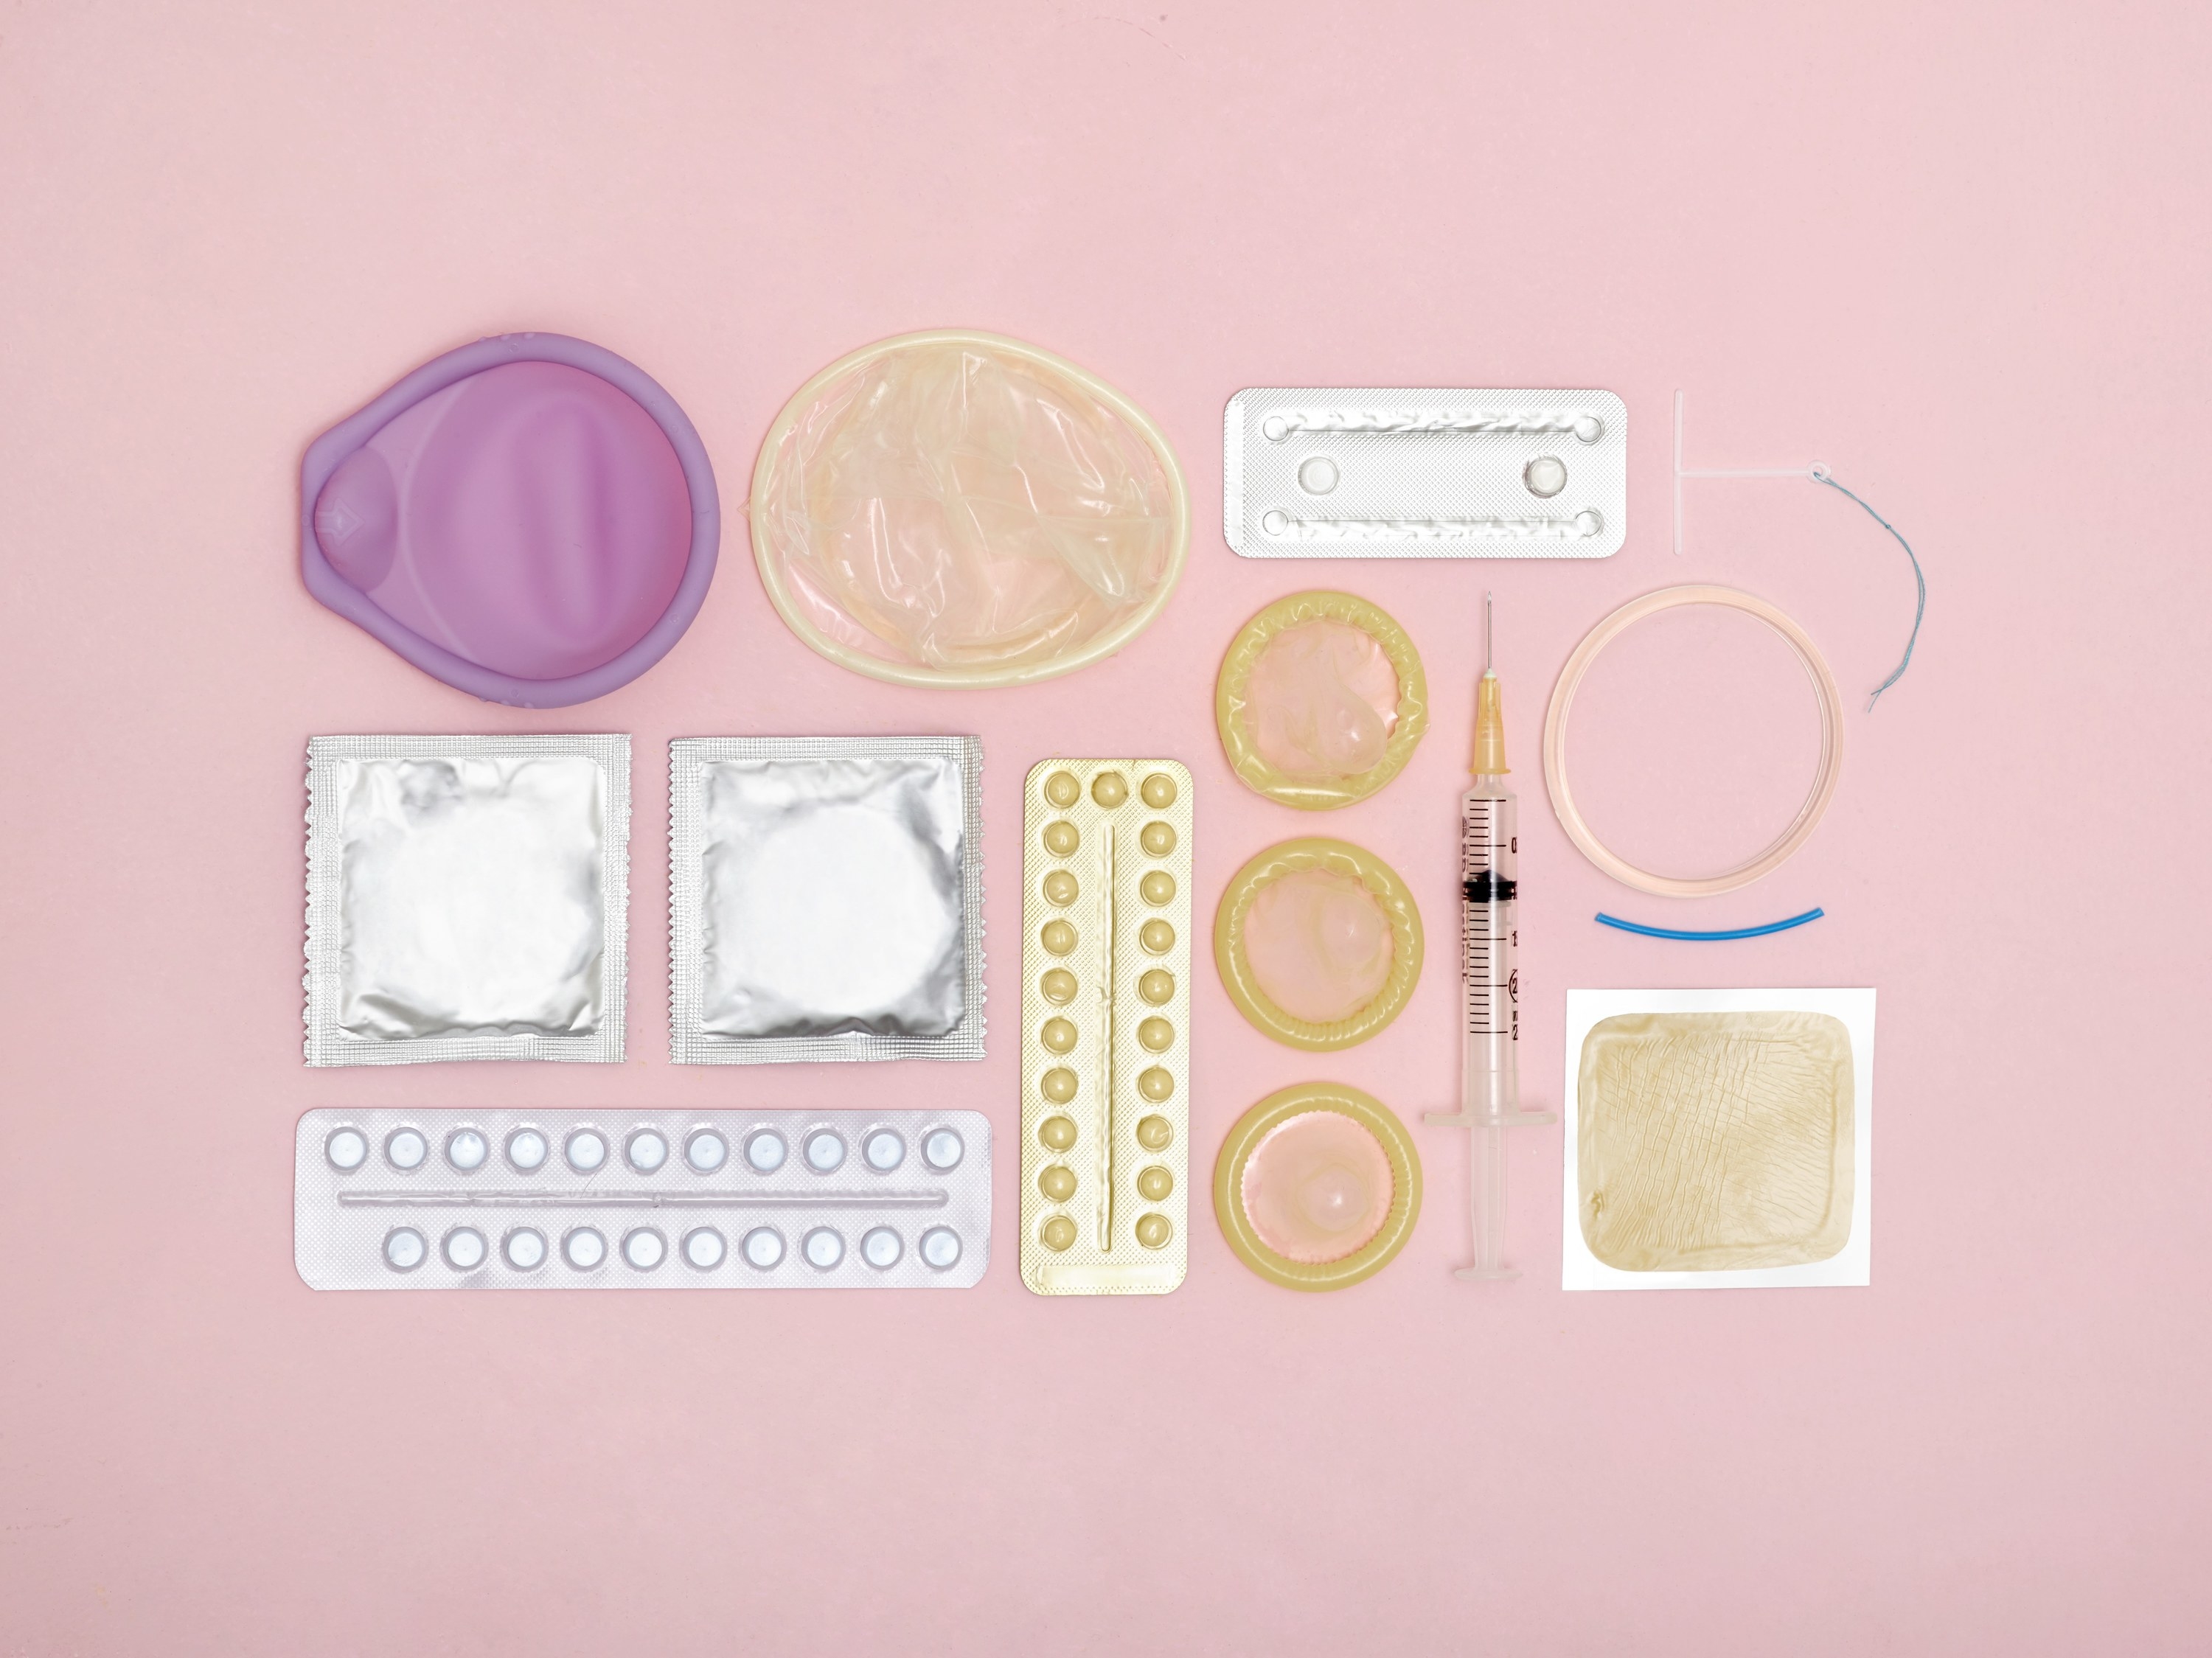 A stock image of birth control options